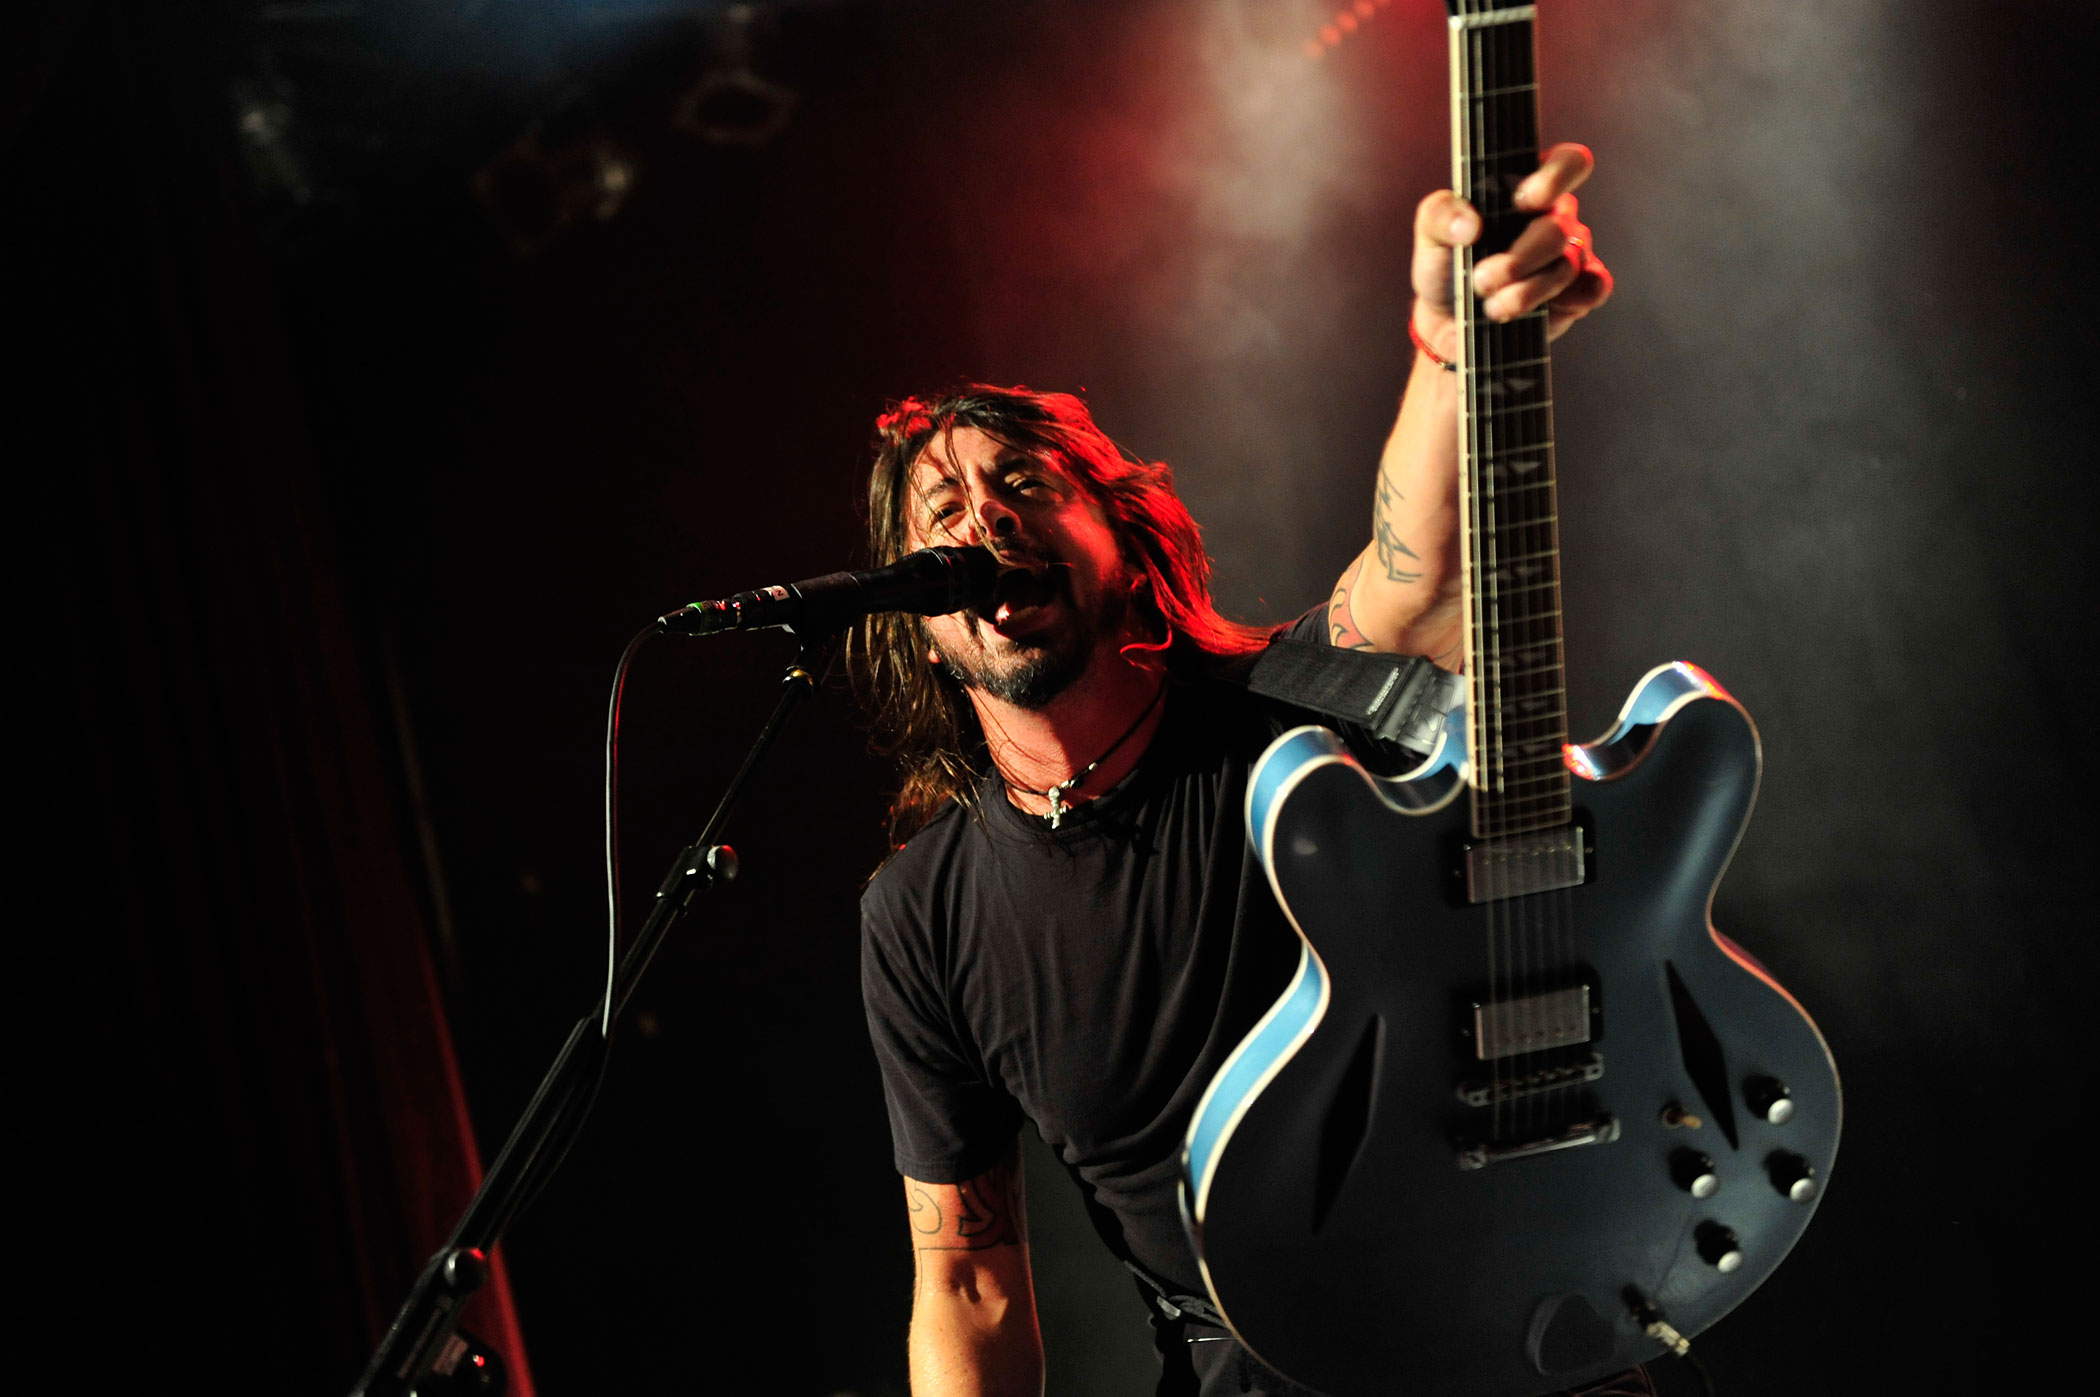 Dave Grohl of the Foo Fighters performs on stage at the Gloria Theatre on February 28, 2011 in Cologne, Germany.